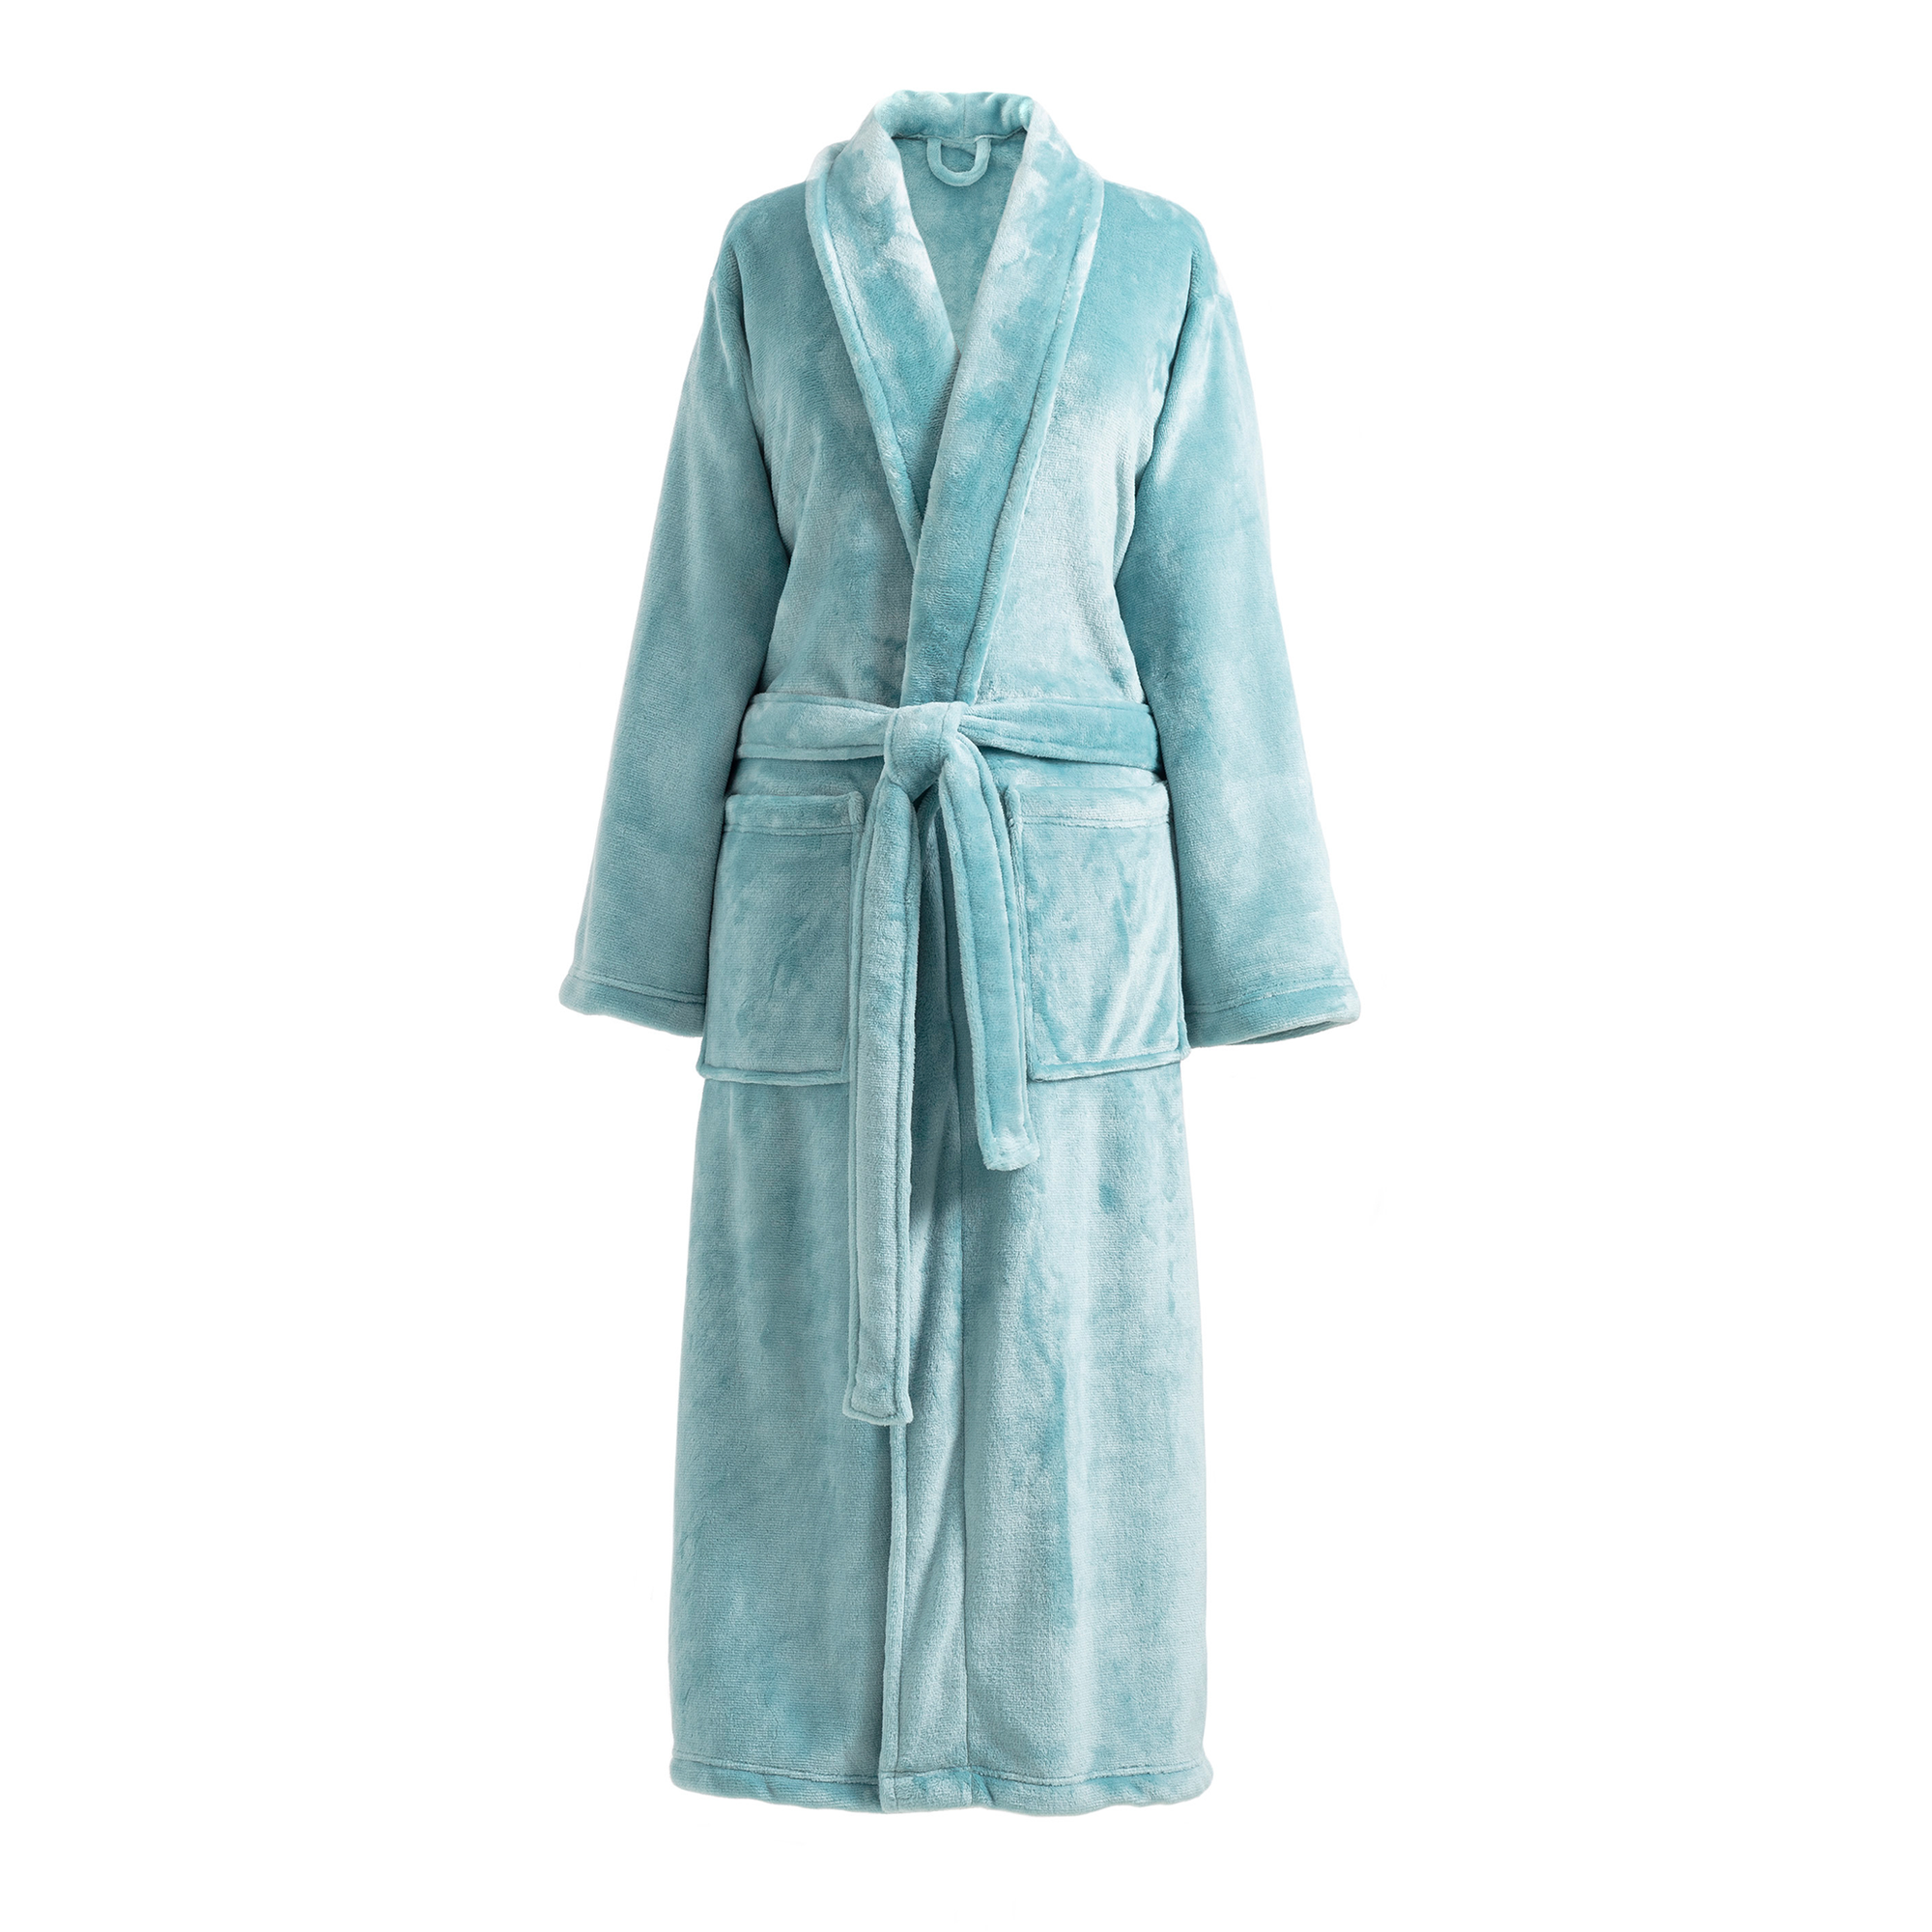 Whole Image of Pine Cone Hill Sheepy Fleece 2.0 Robe in Teal Color